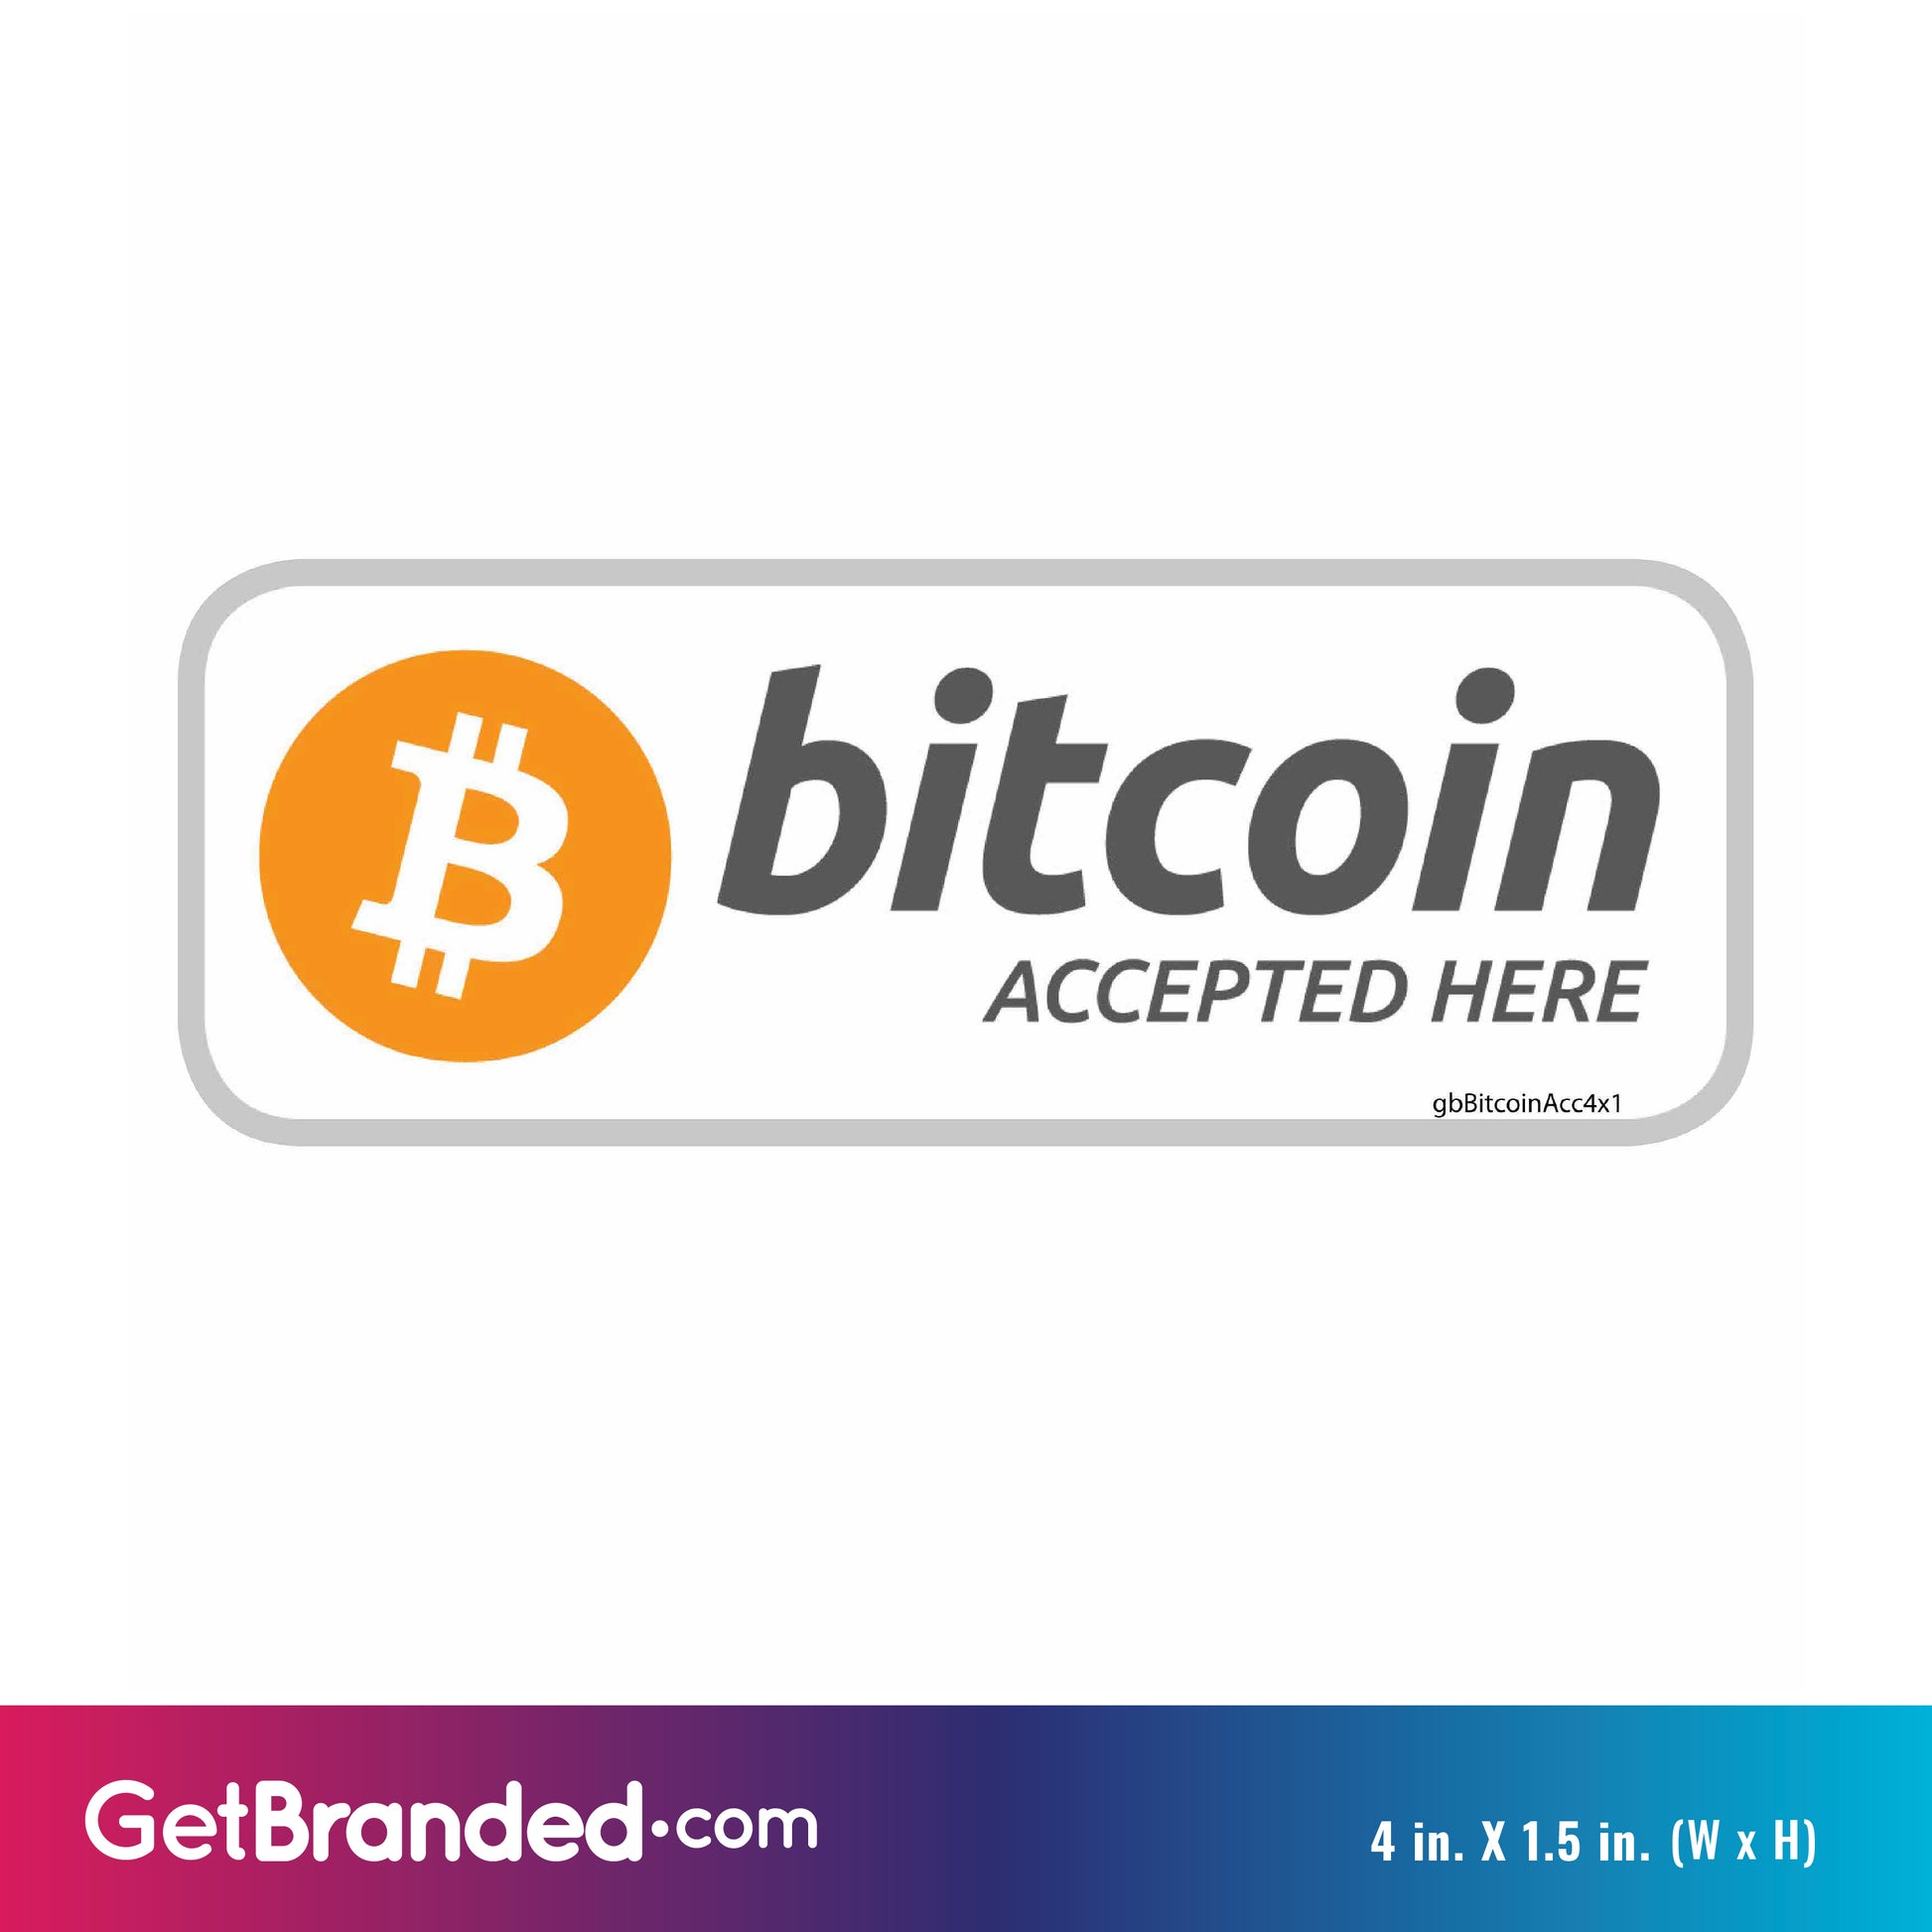 Bitcoin Accepted Here Decal size guide. 4 inches by 1.5 inches in size.